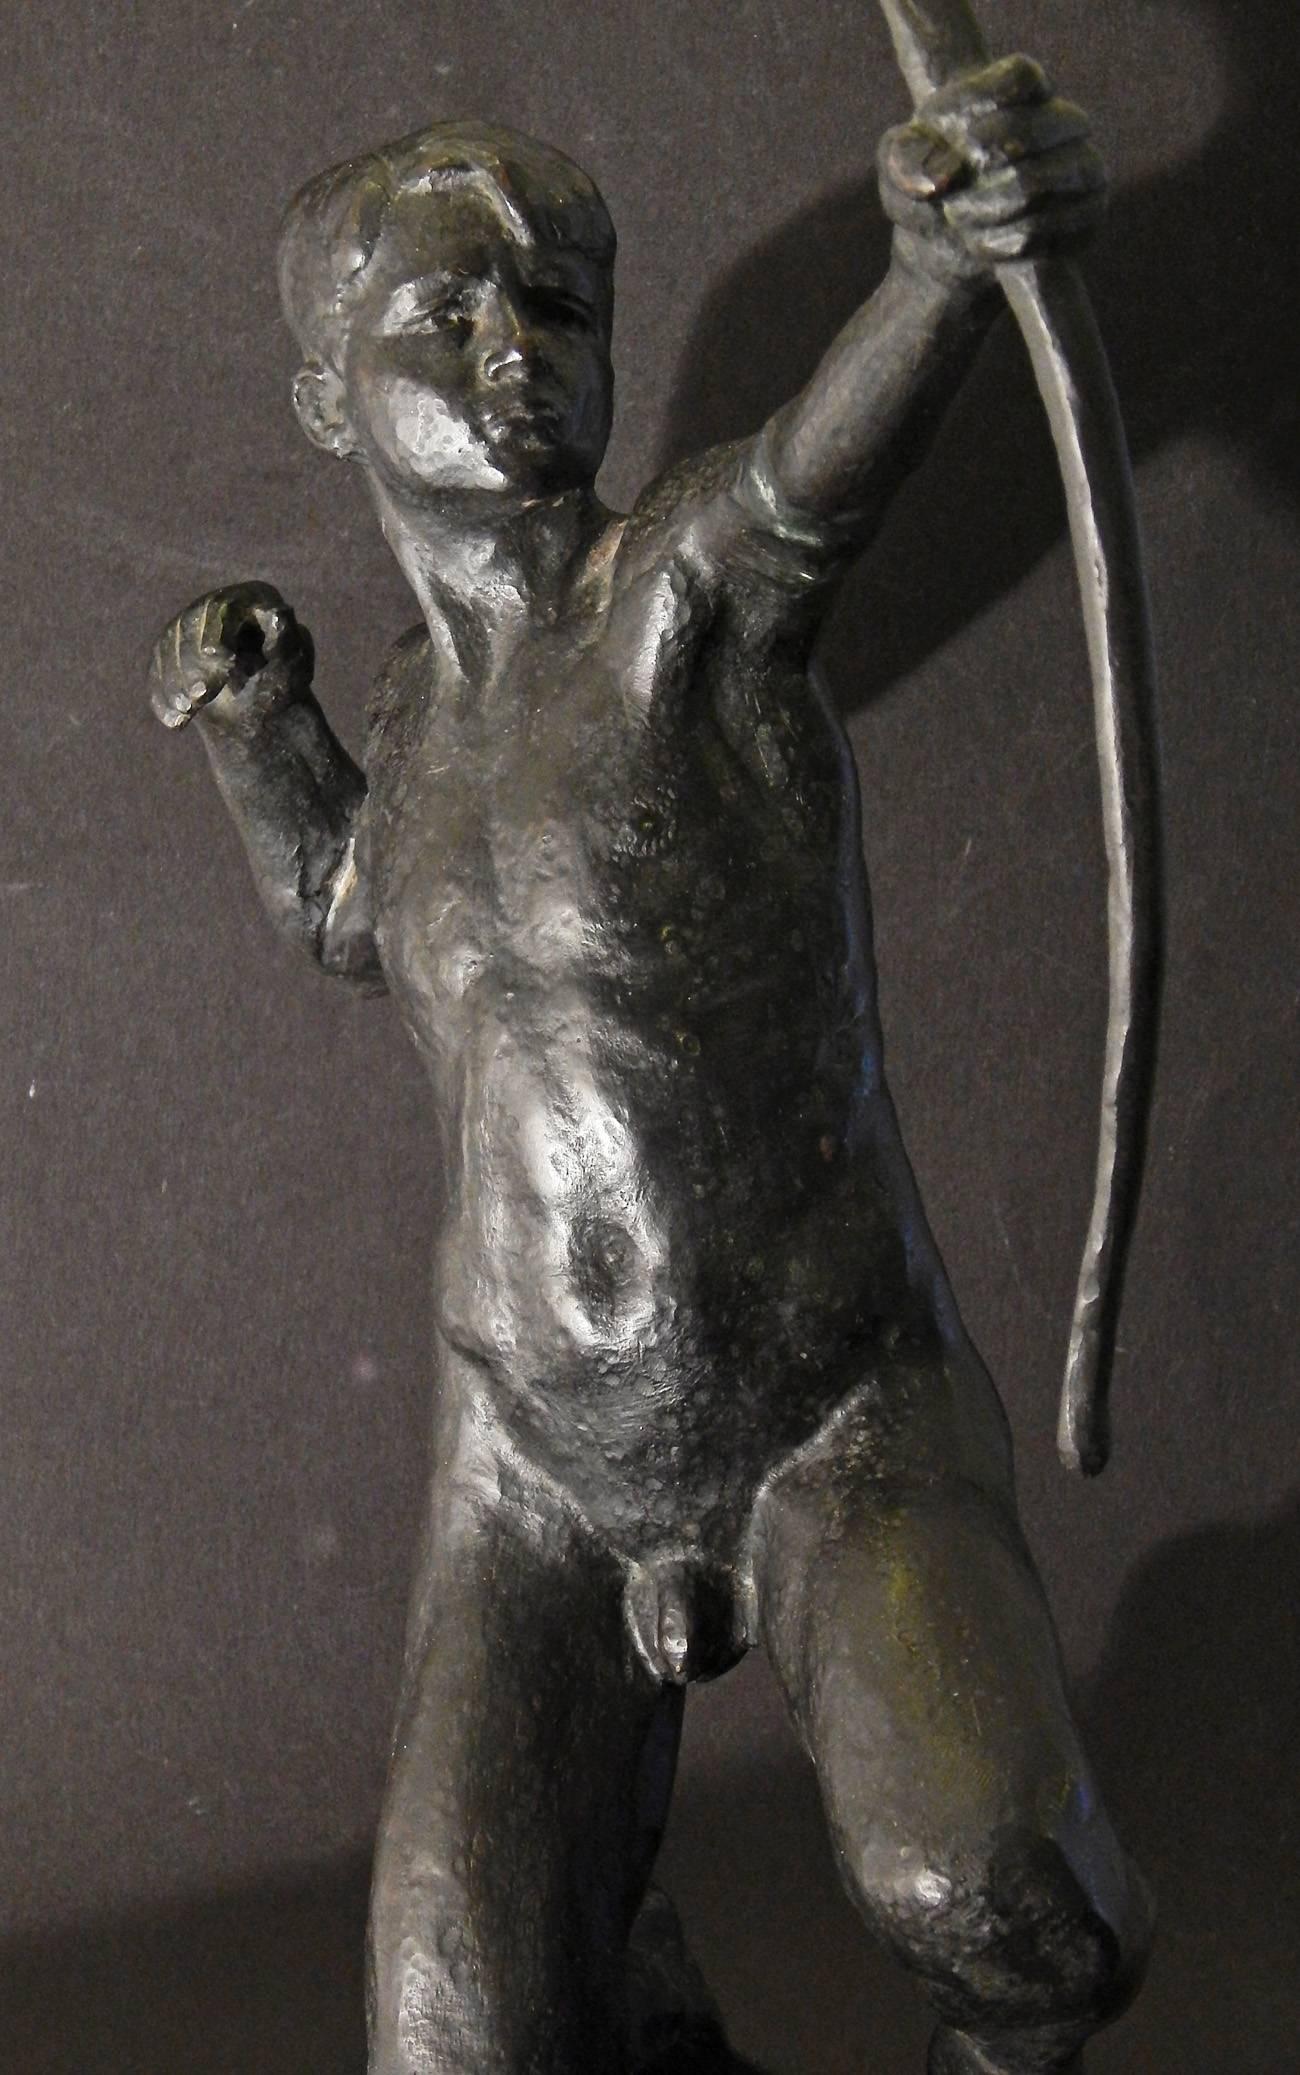 A sensitive and beautiful bronze of a male youth drawing his bow, this sculpture was created by Fritz Best between the world wars in Germany. Like Henry Scott Tuke in Great Britain, Best seemed to specialize in young men in various nude poses,